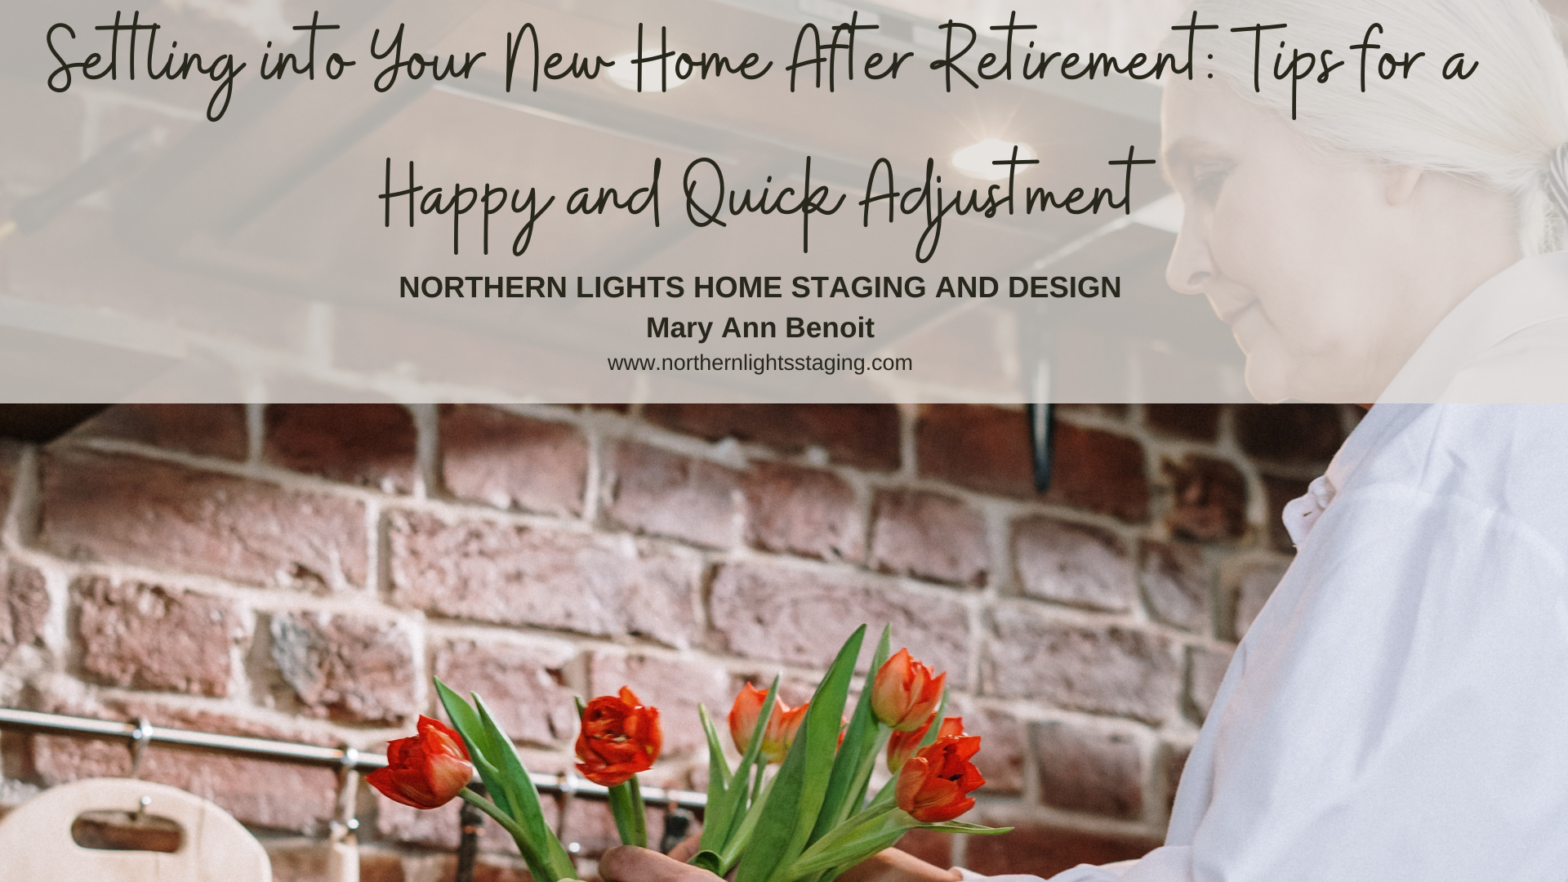 Retirement is a time to relax and enjoy the fruits of your labor. Many retirees choose to move to a new home during this time, whether it's downsizing to a smaller space or moving closer to family and friends. Adjusting to a new home after retirement can be challenging, but with a few tips and tricks from Northern Lights Home Staging and Design, you can quickly and happily settle into your new space.